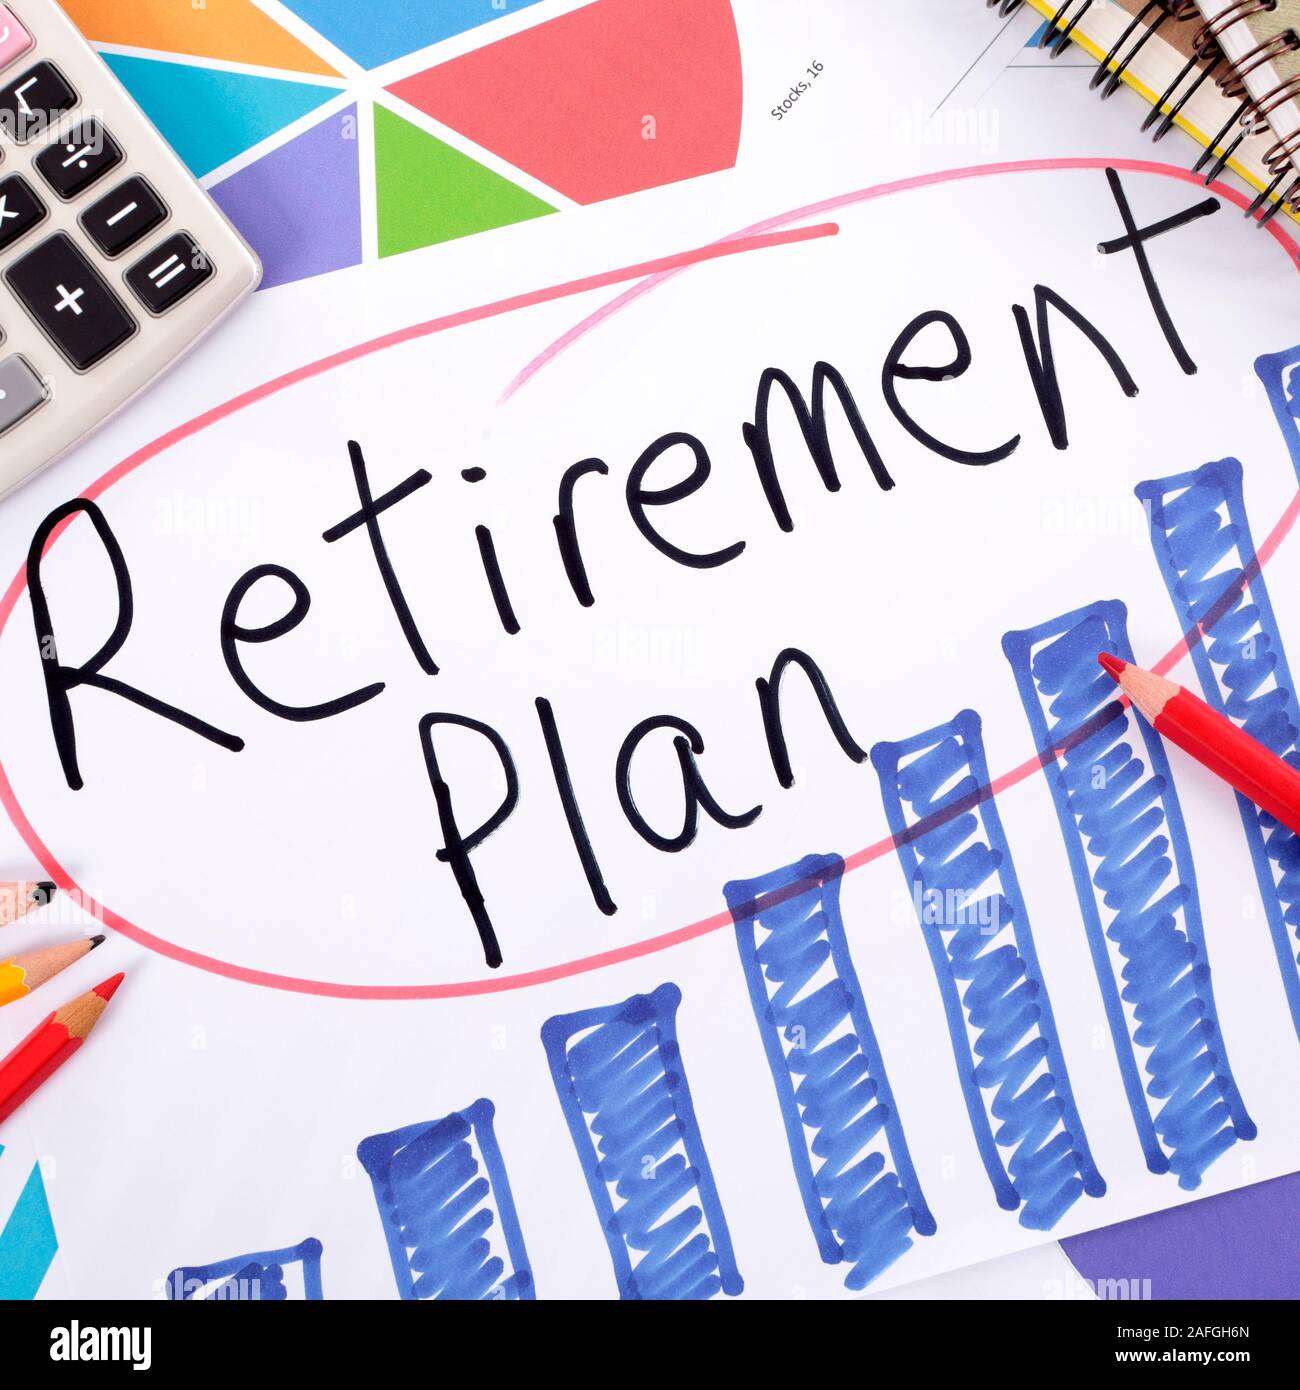 The words Retirement Plan written on a hand drawn bar chart surrounded by pencils, books and calculator. Stock Photo